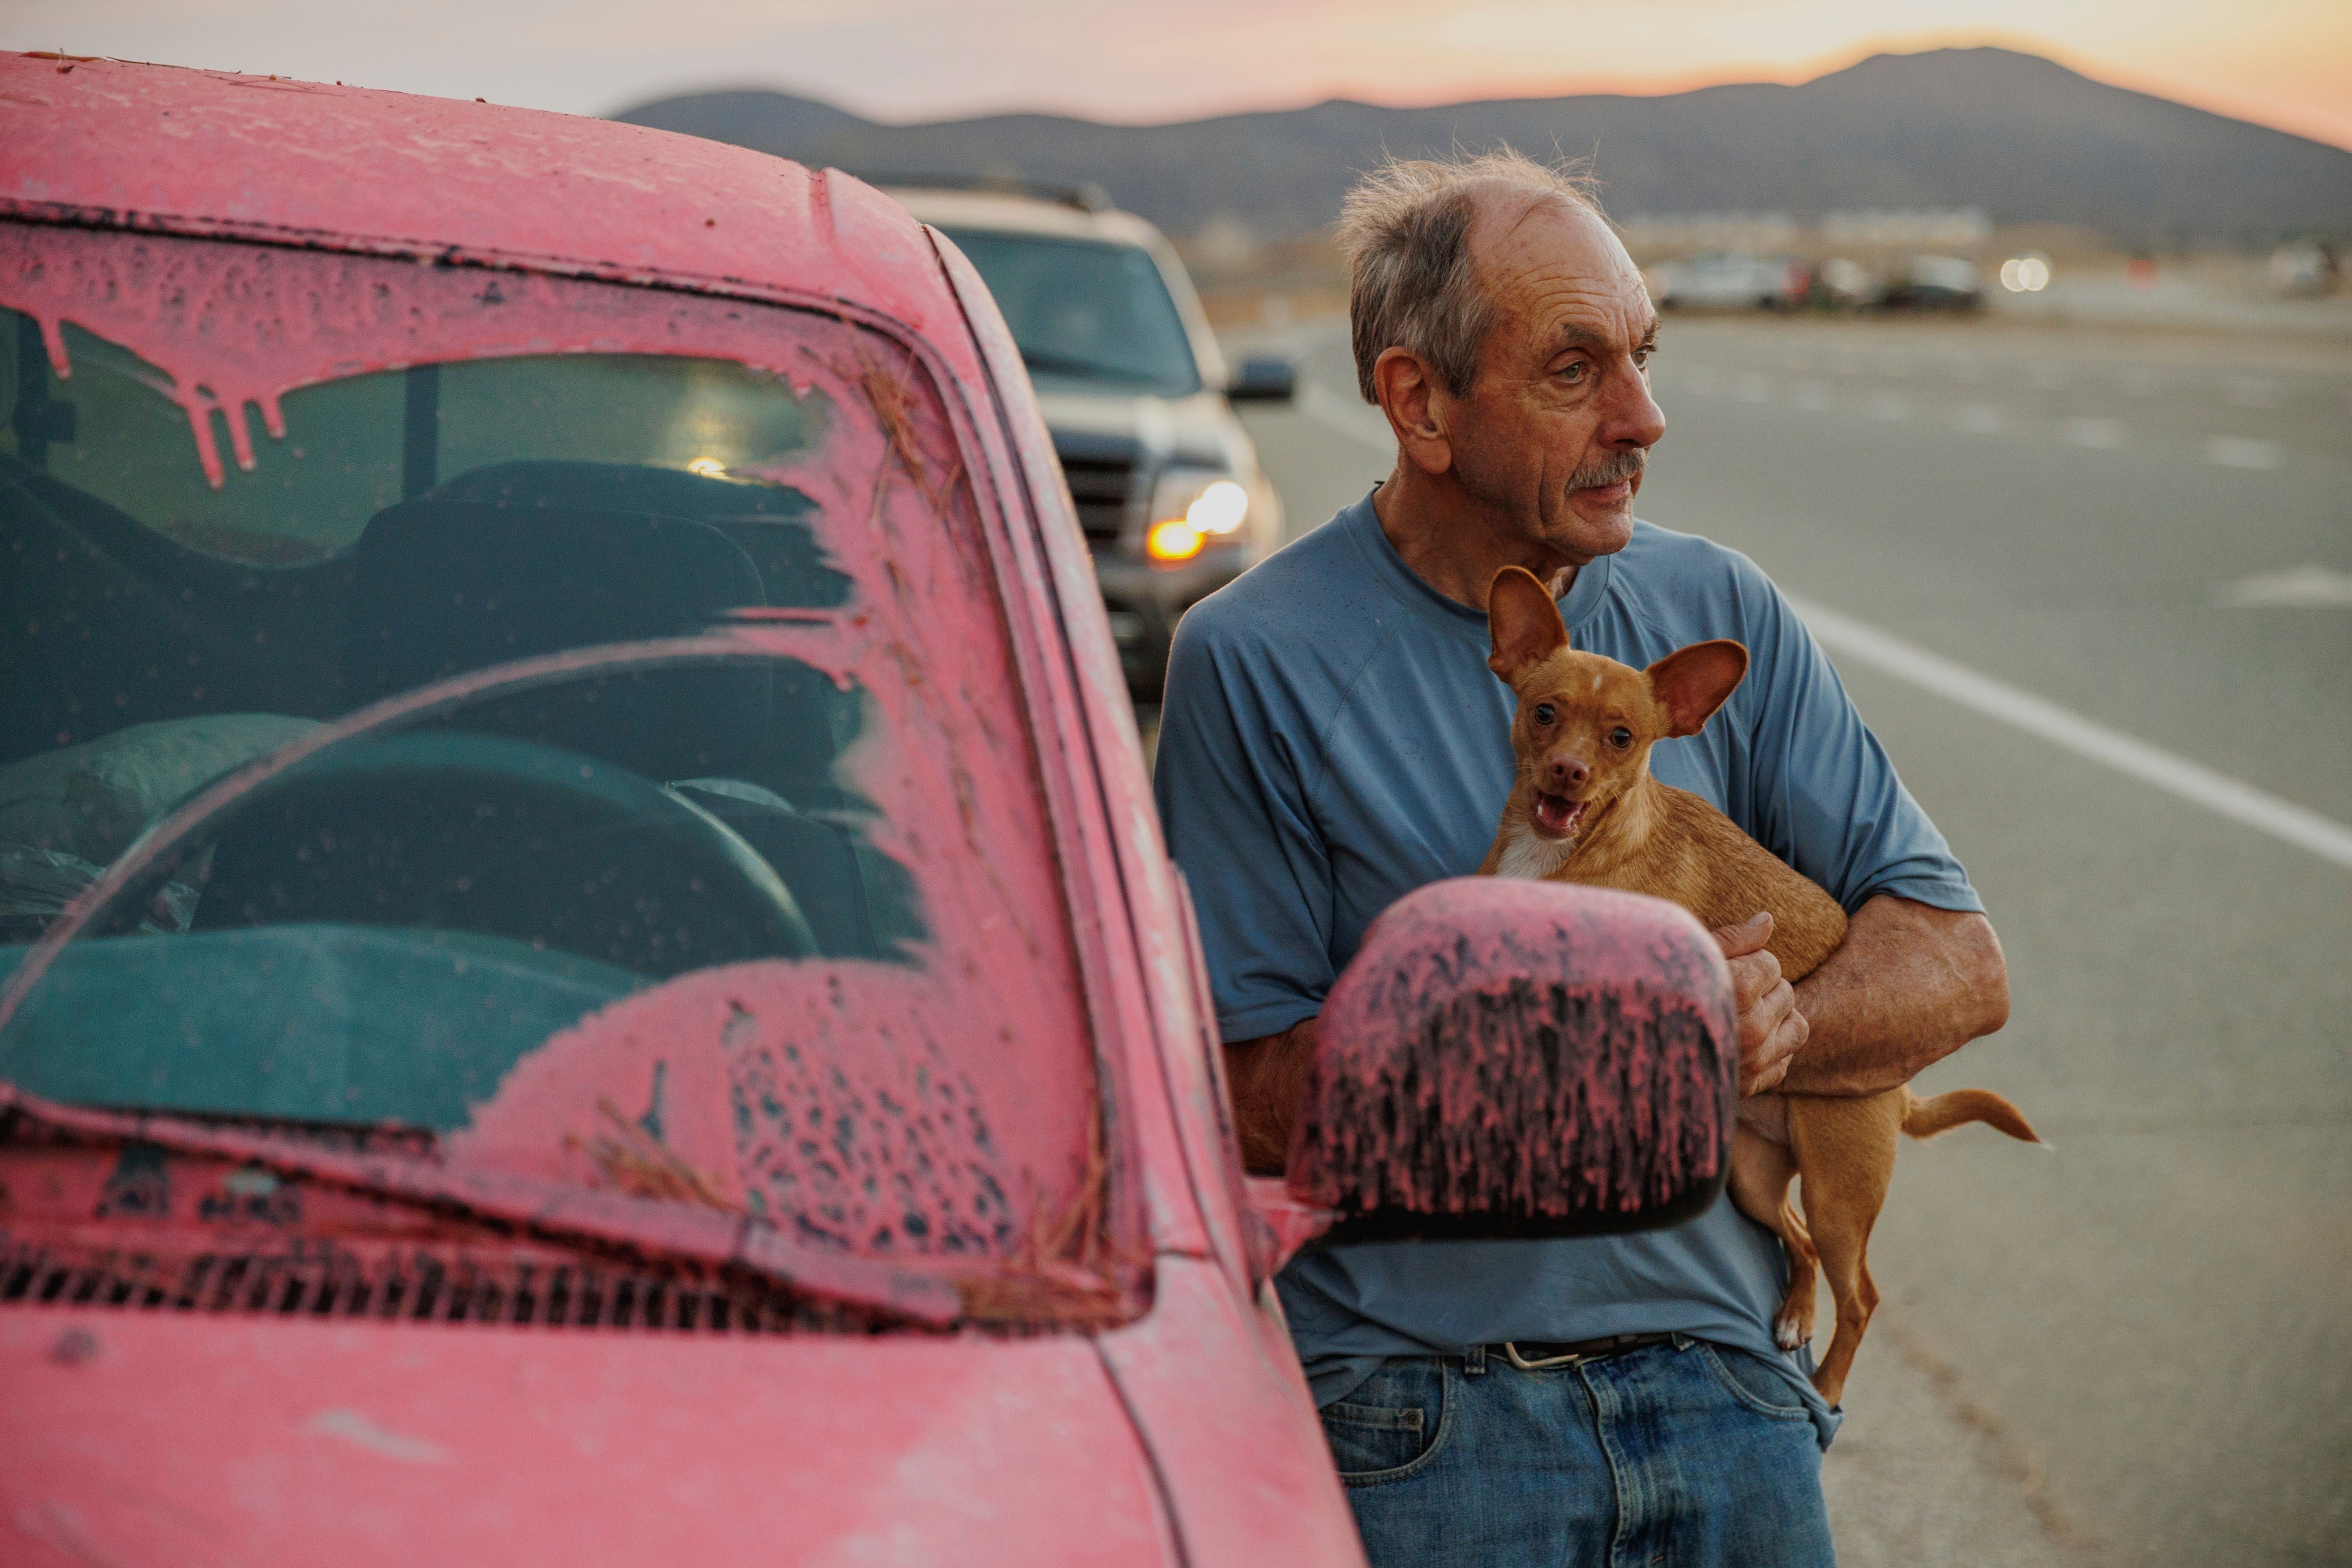 A man holds a dog after evacuating the Fairview Fire outside Hemet, California